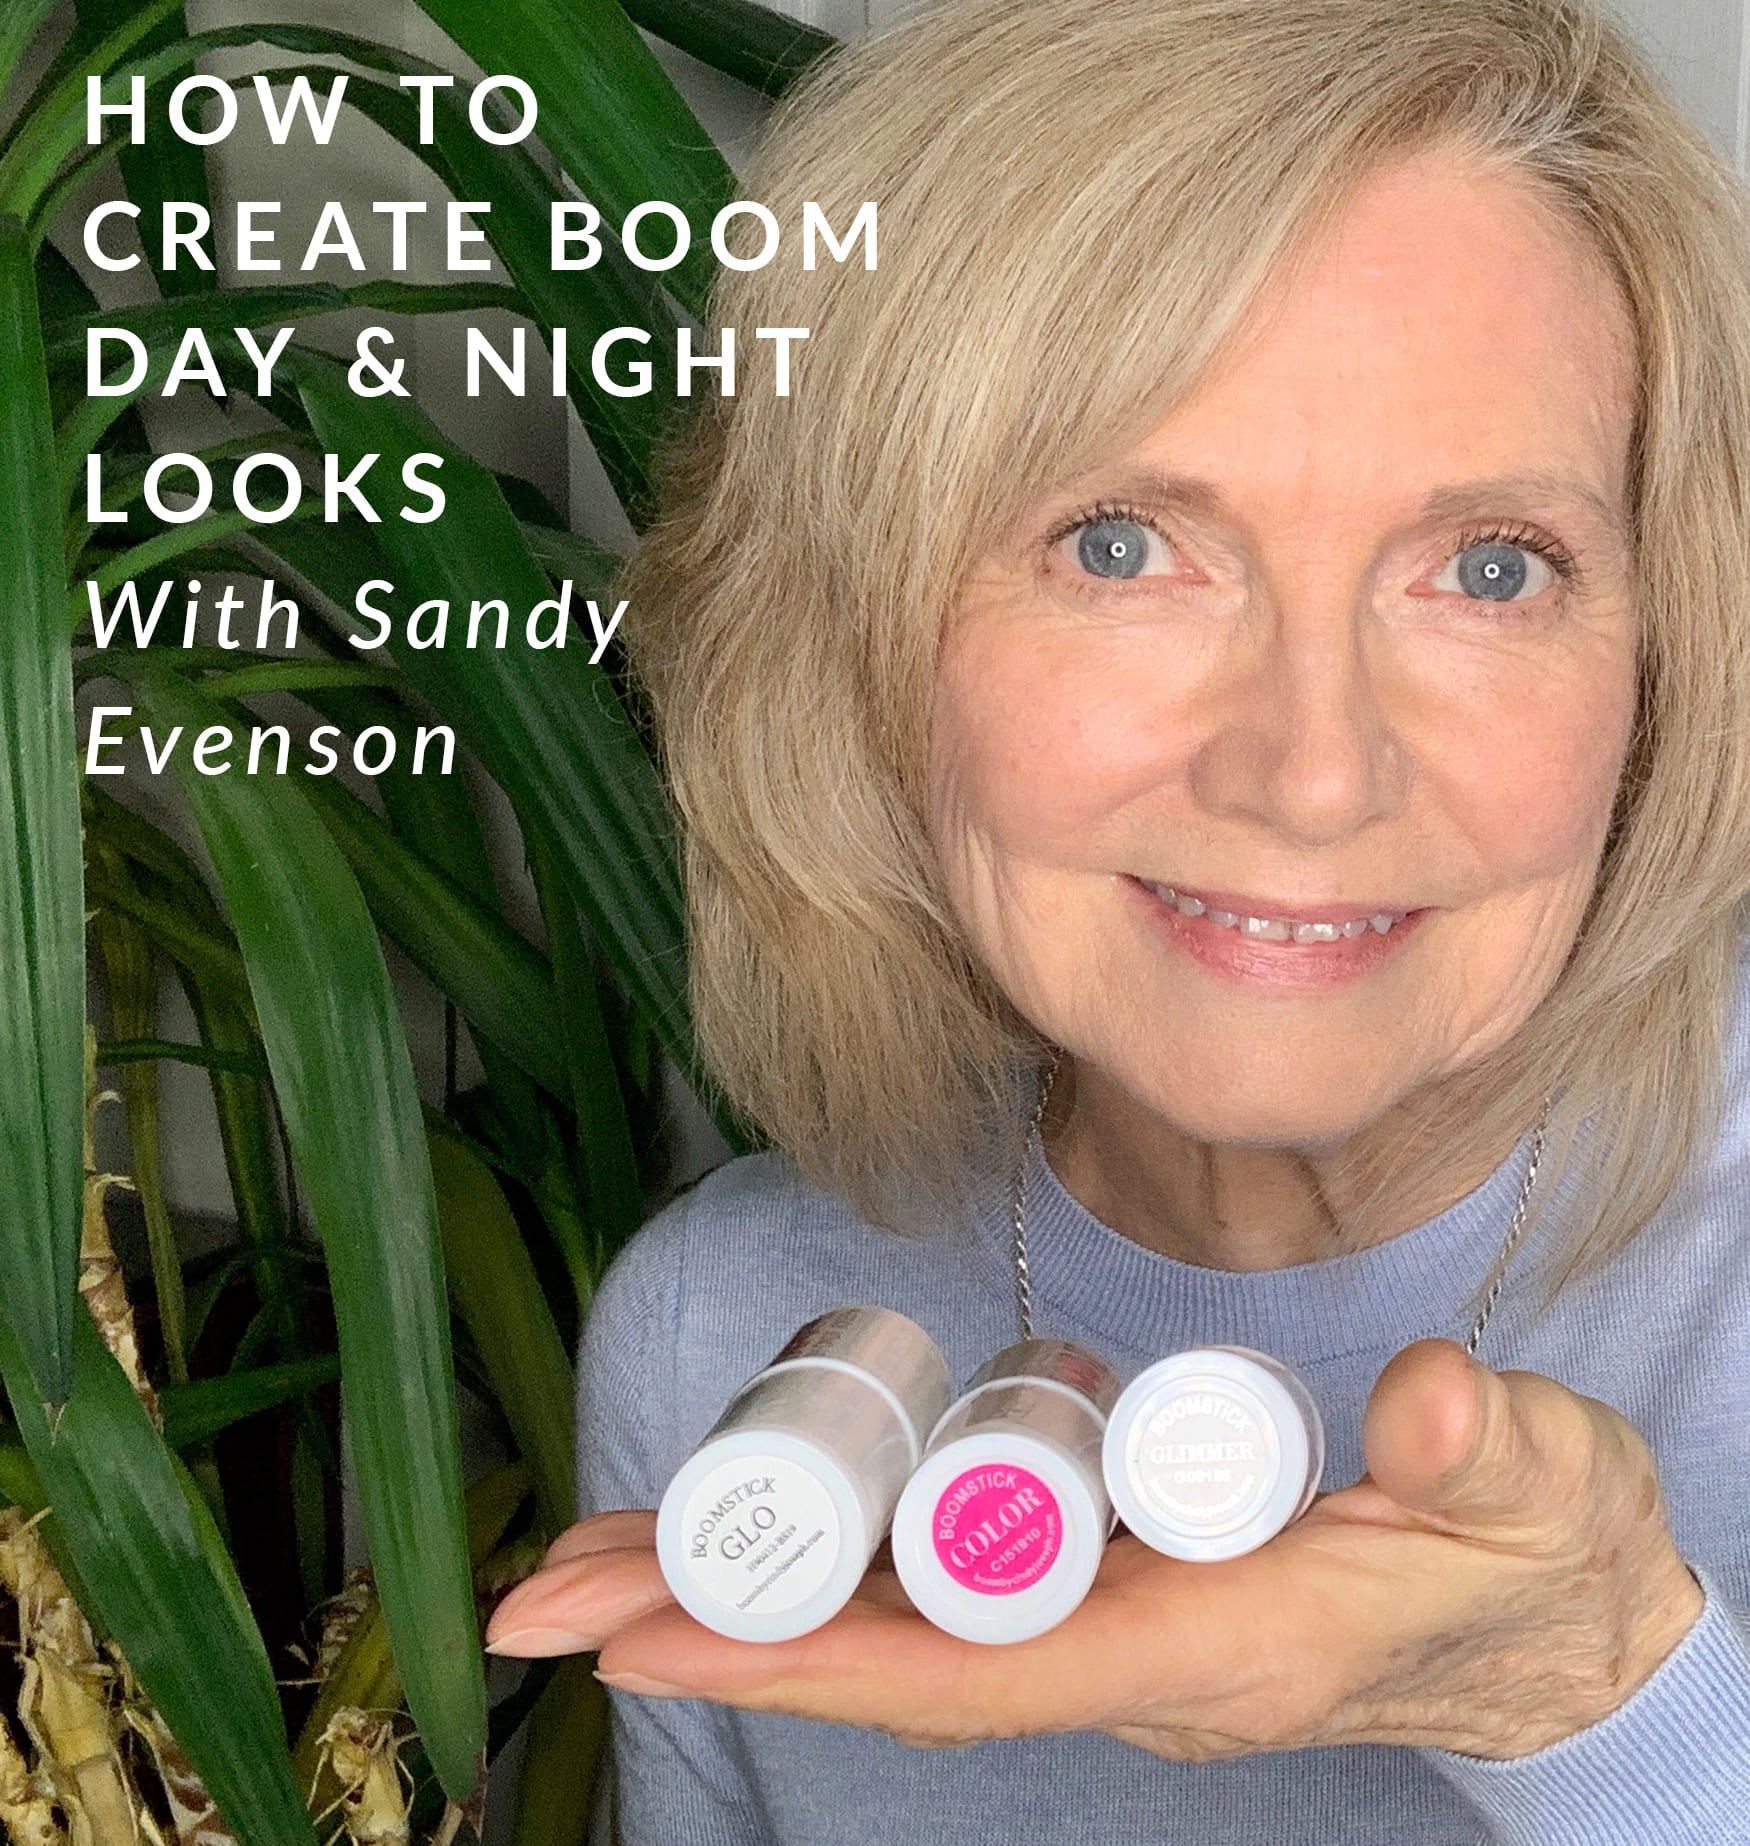 How to Create Boom Day & Night Looks With Sandy Evenson